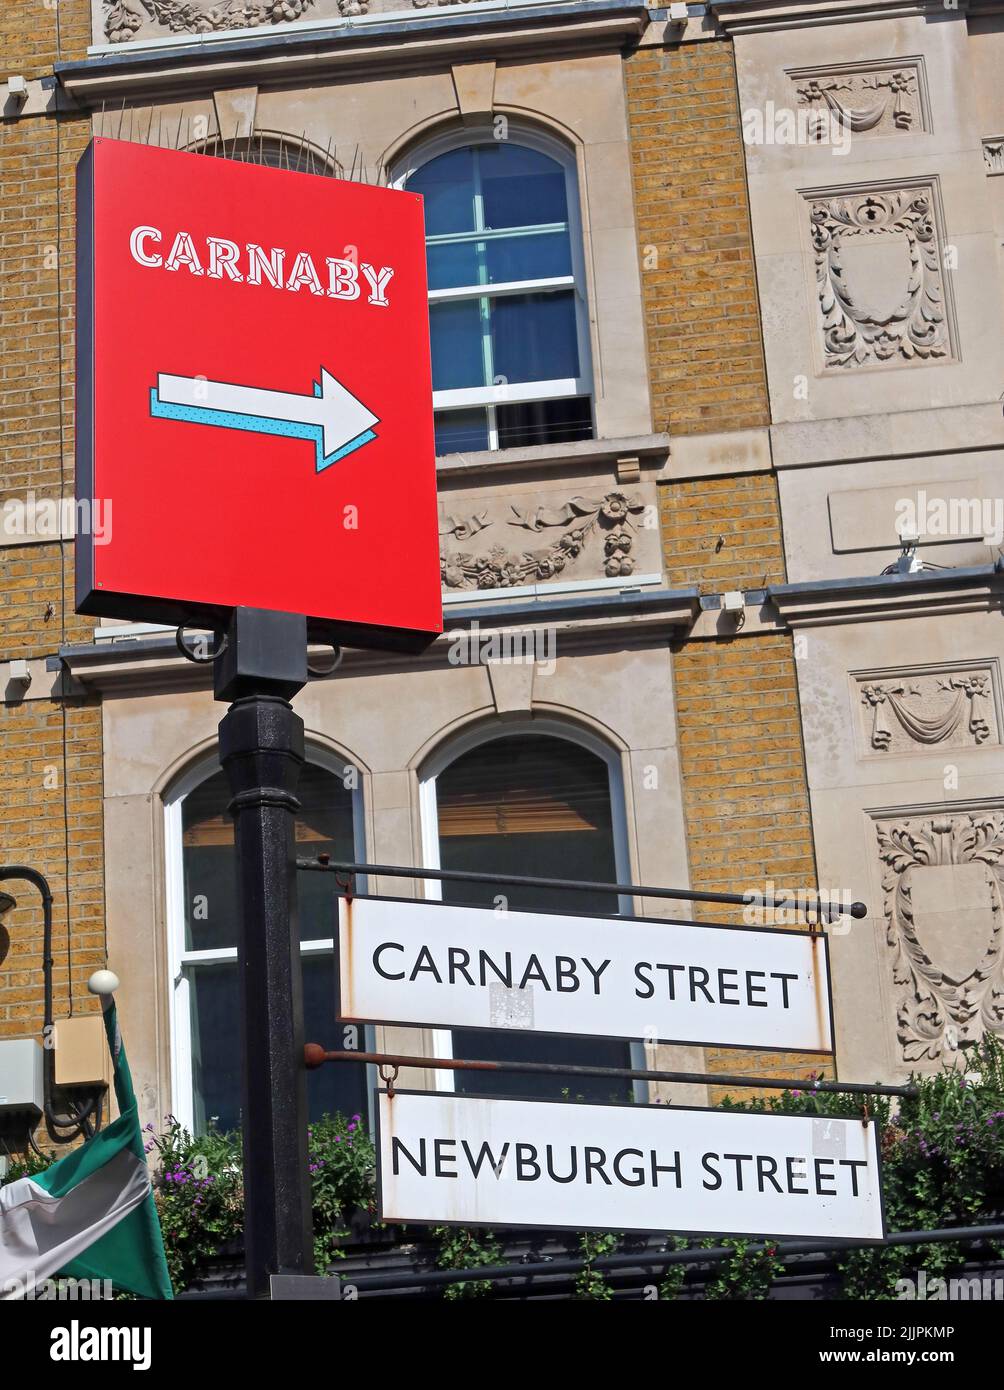 Carnaby This Way, Carnaby Street et Newburgh Streets à Soho, Londres, Angleterre, Royaume-Uni, W1F 9PF Banque D'Images